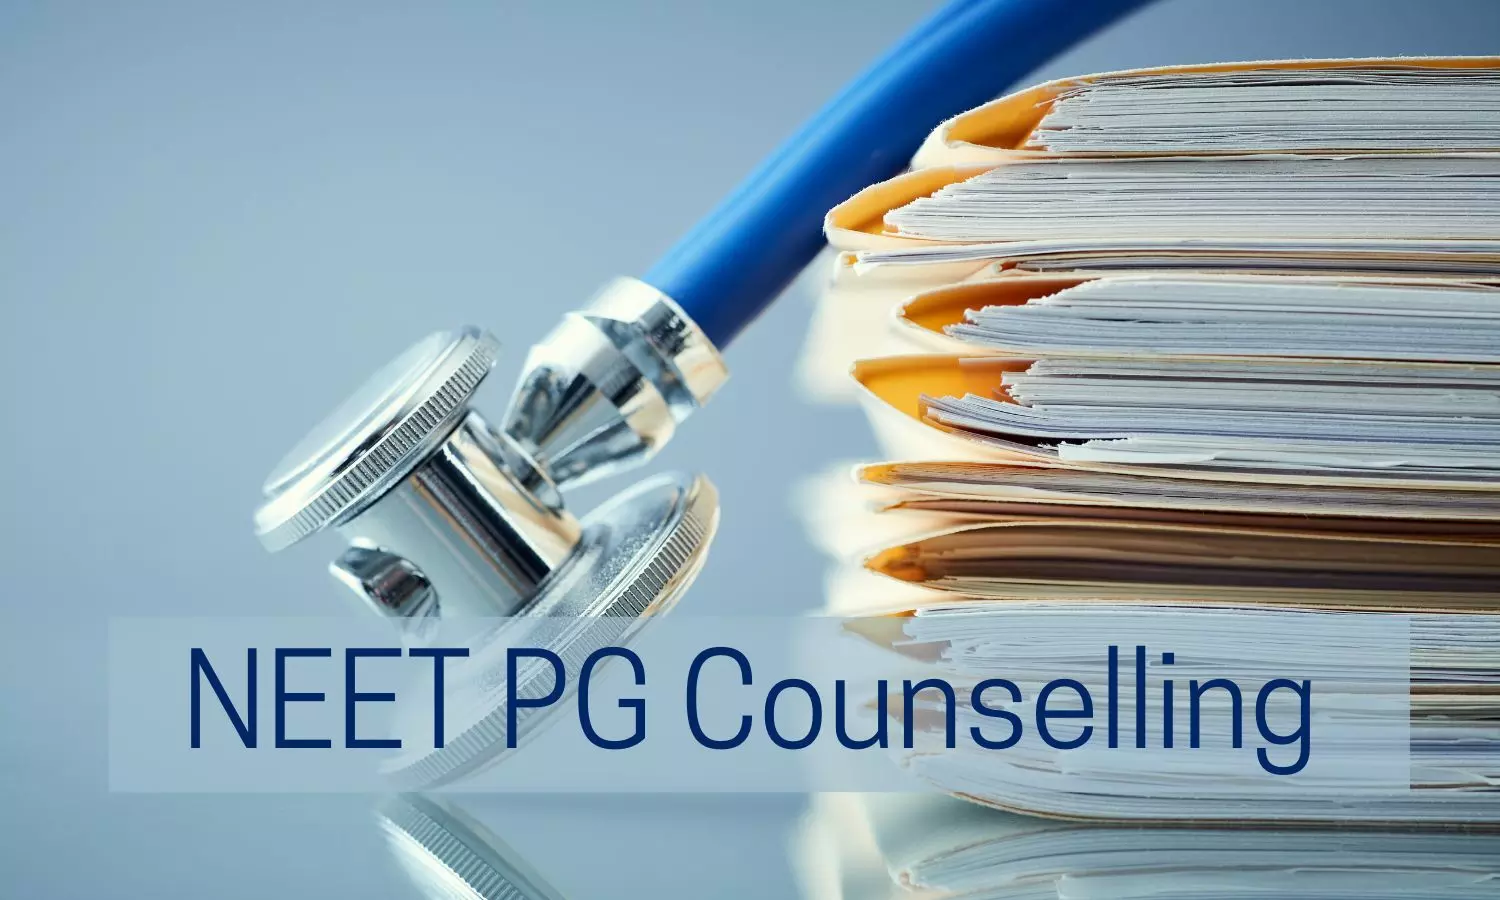 DME Assam Begins NEET PG Counselling, Register for Round 1 till September 23, check out full schedule